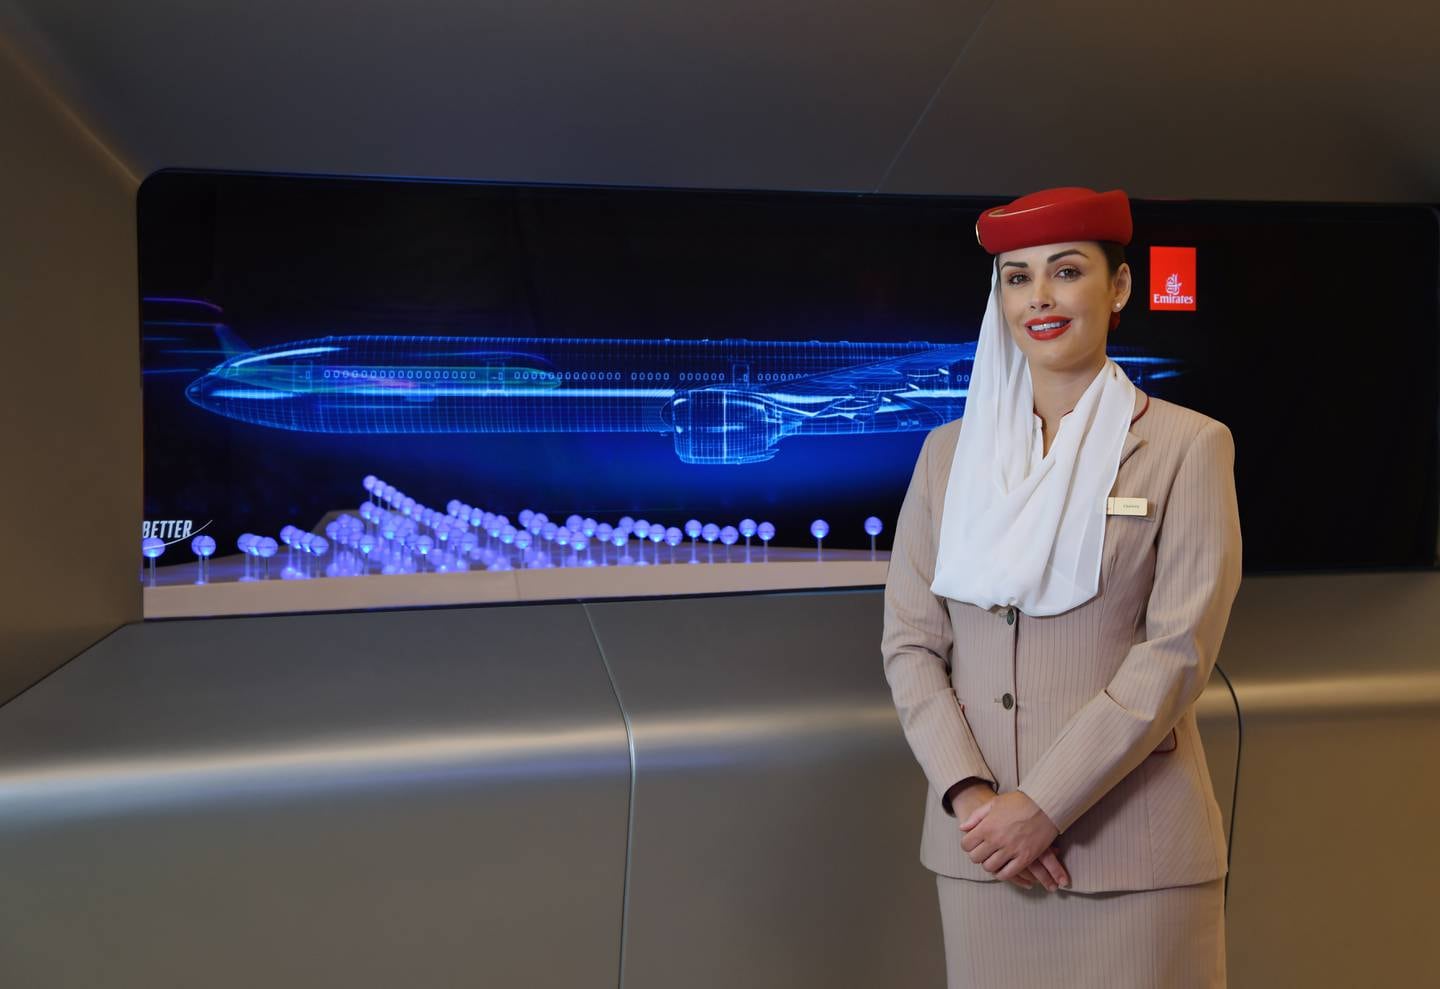 Emirates Pavilion is staffed by cabin crew. Photo: Emirates